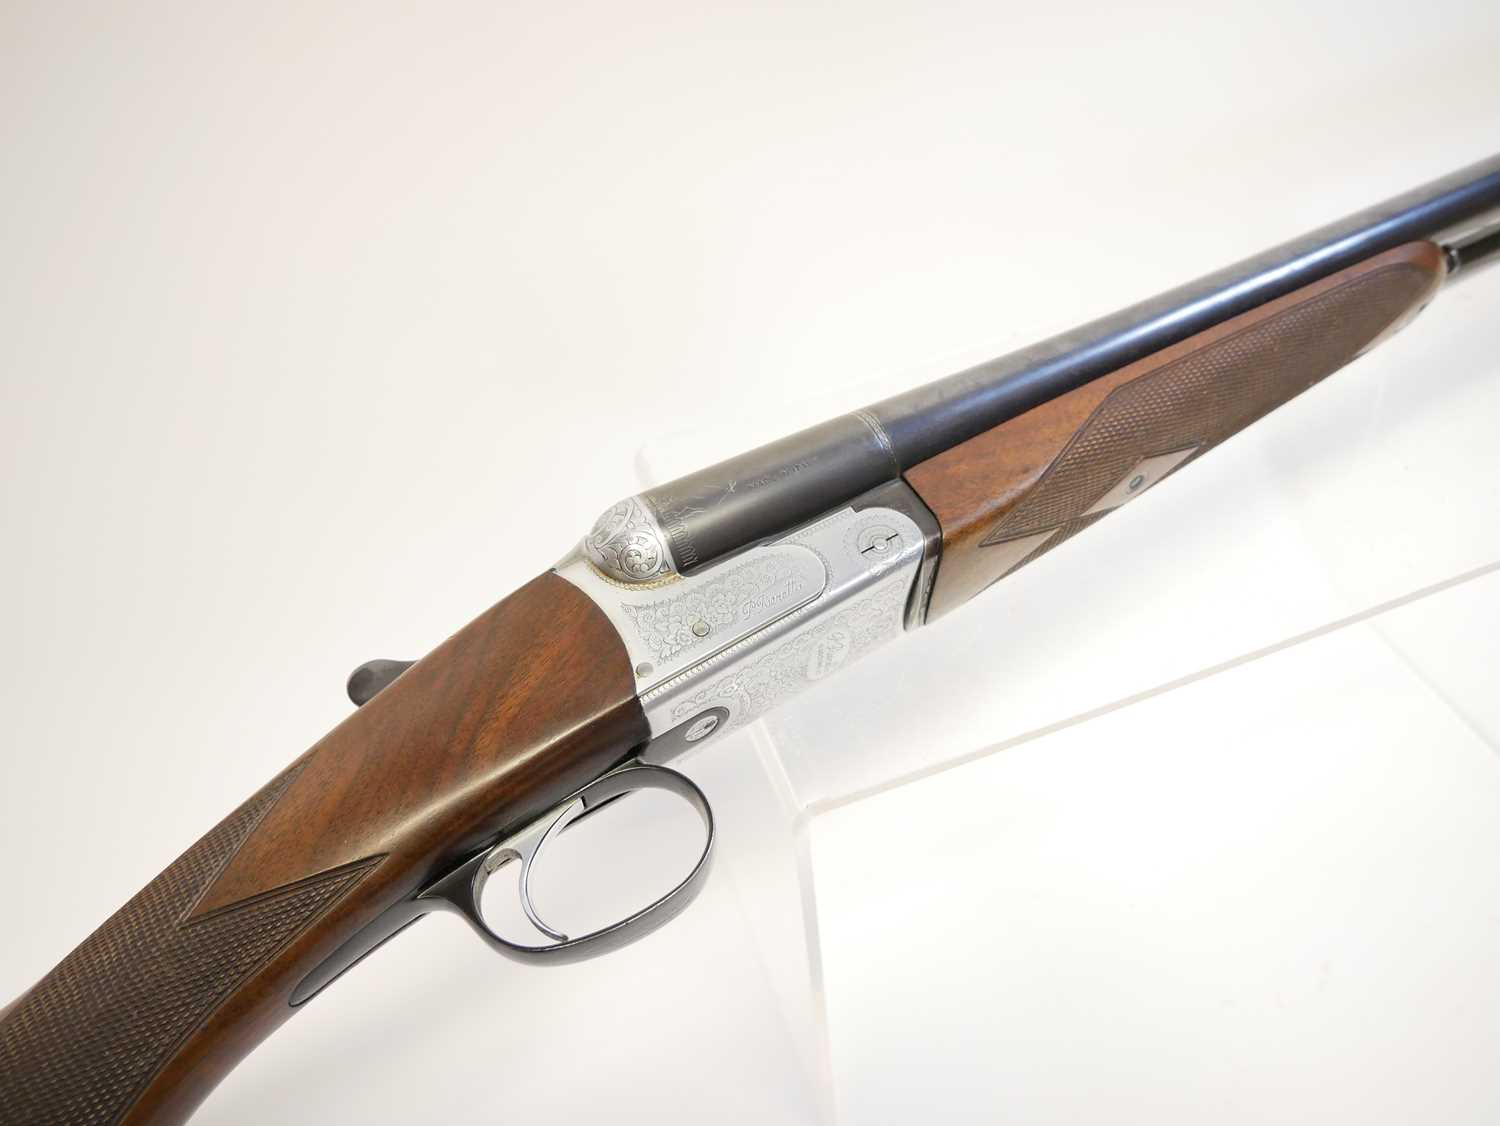 Beretta 12 bore side by side Model 626E shotgun, serial number A40366A, 28inch barrels with half and - Image 6 of 15